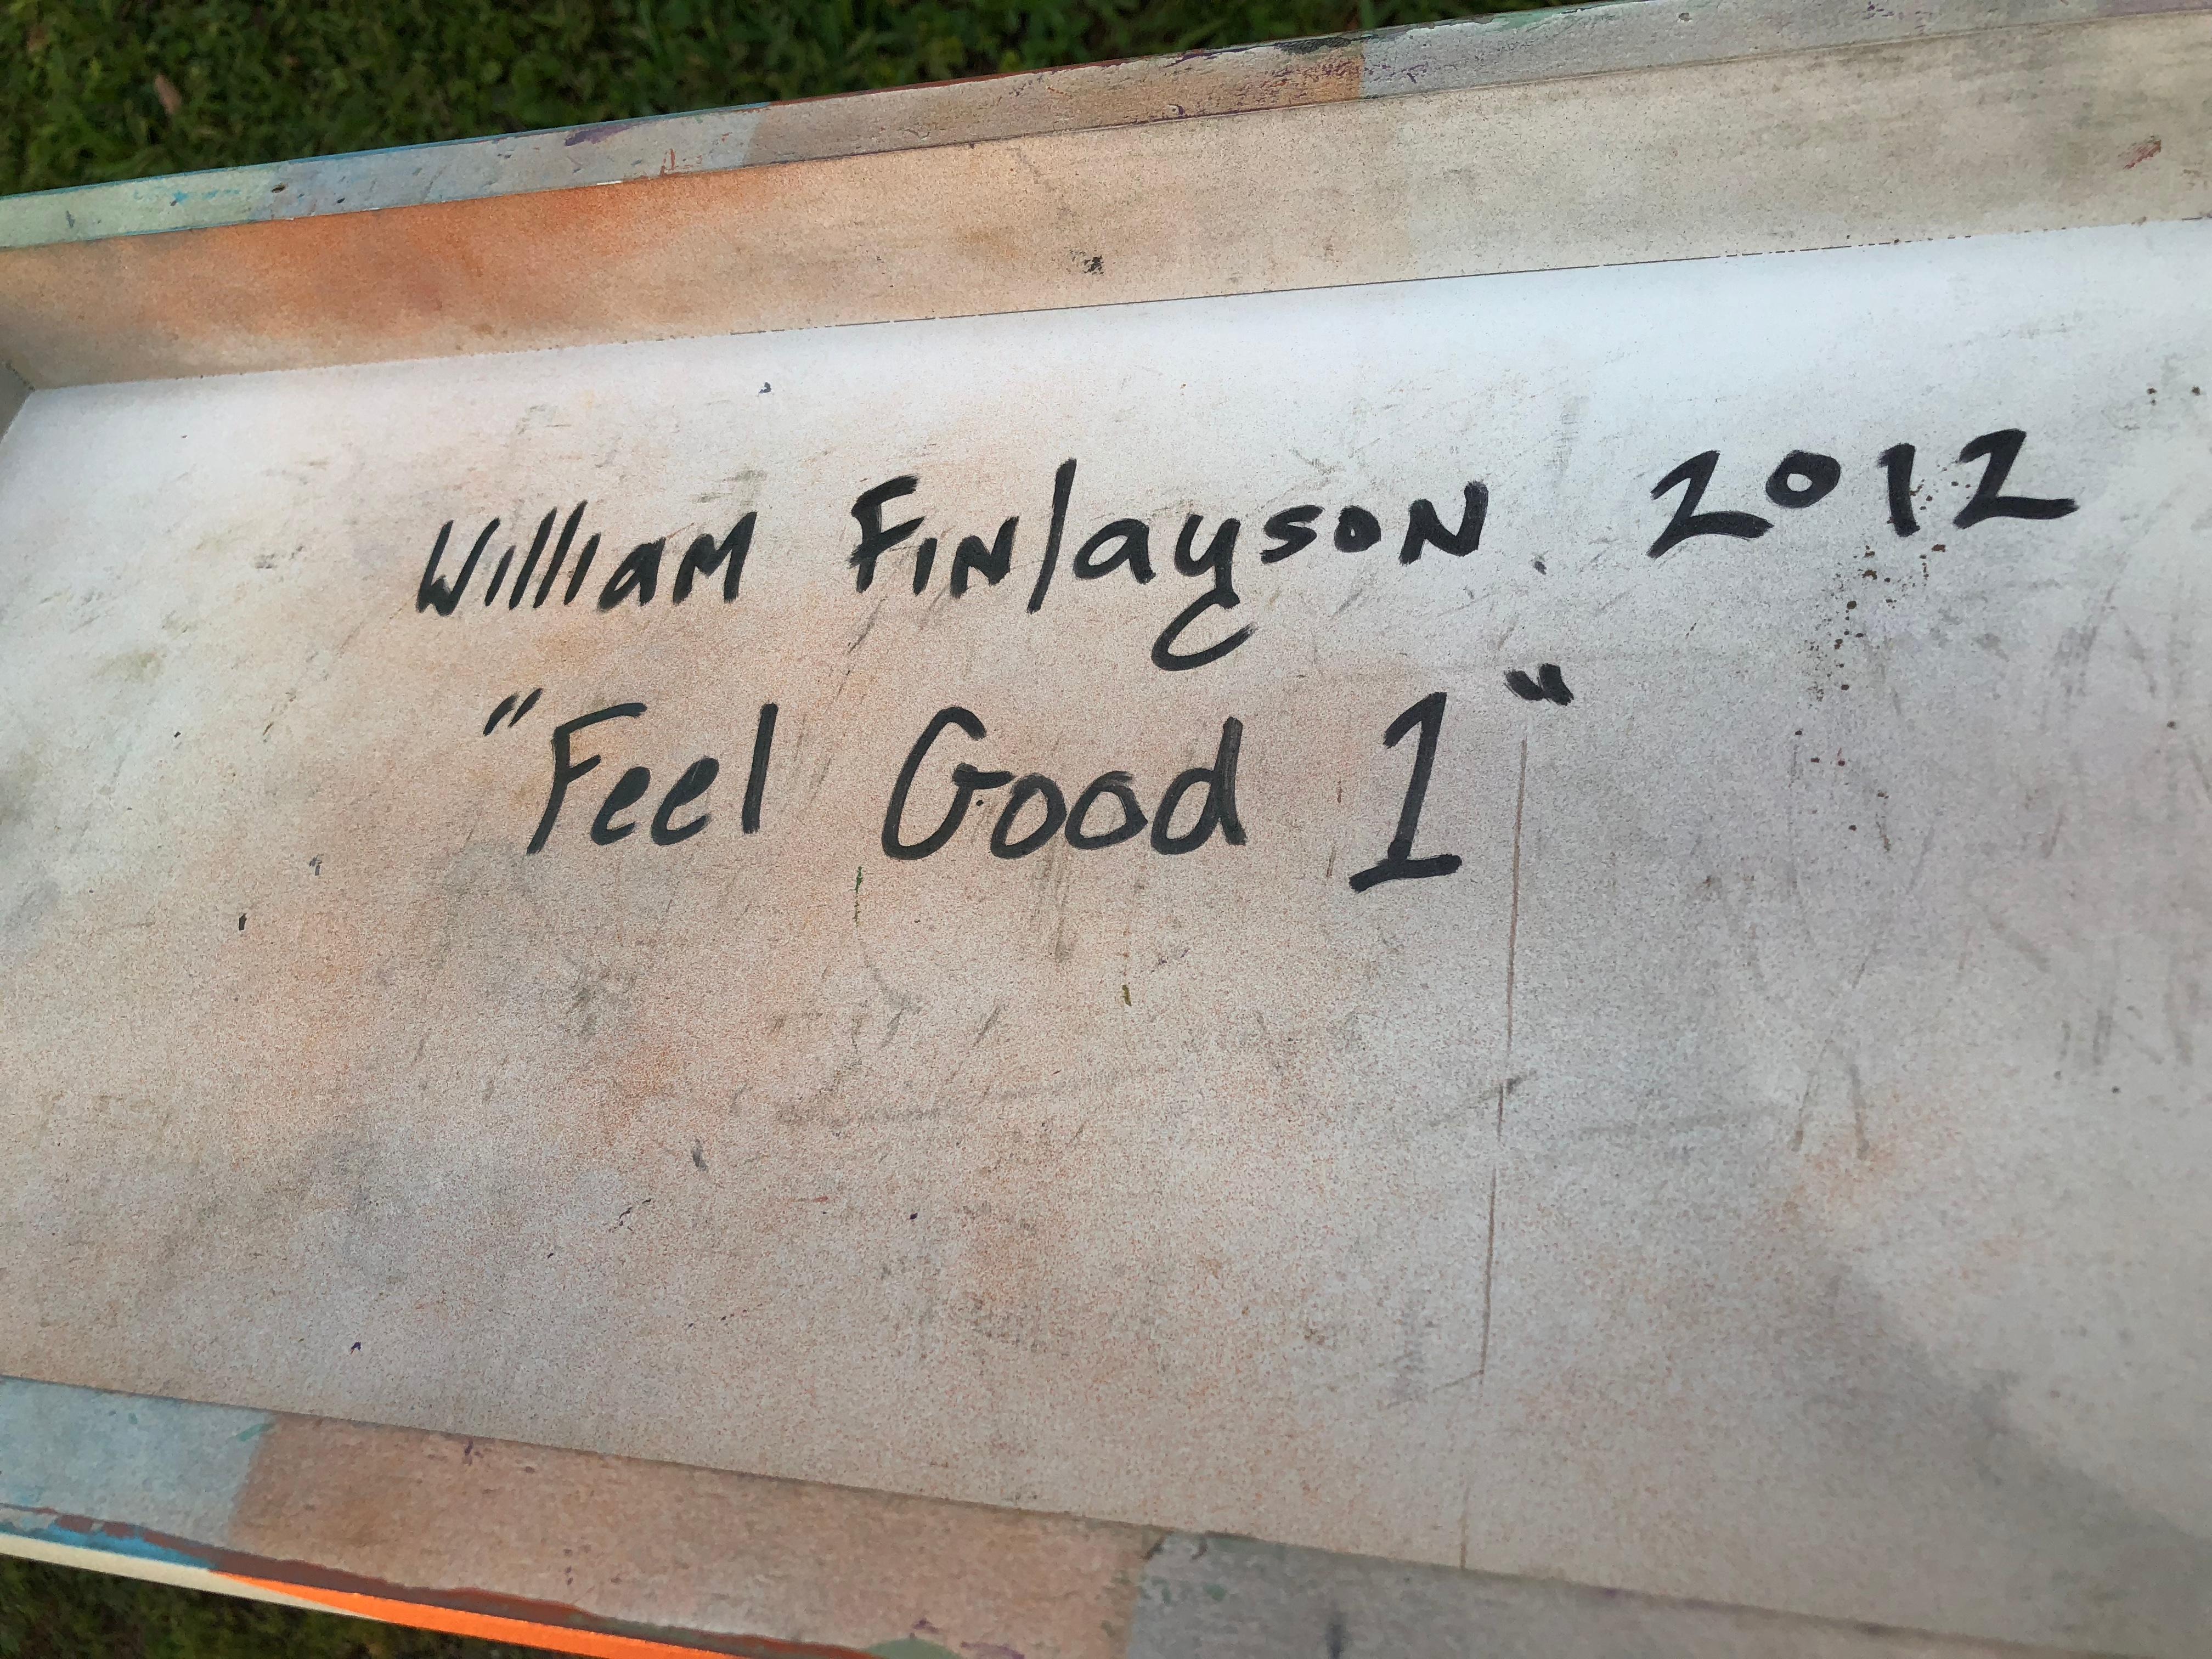 dr william finlayson reviews